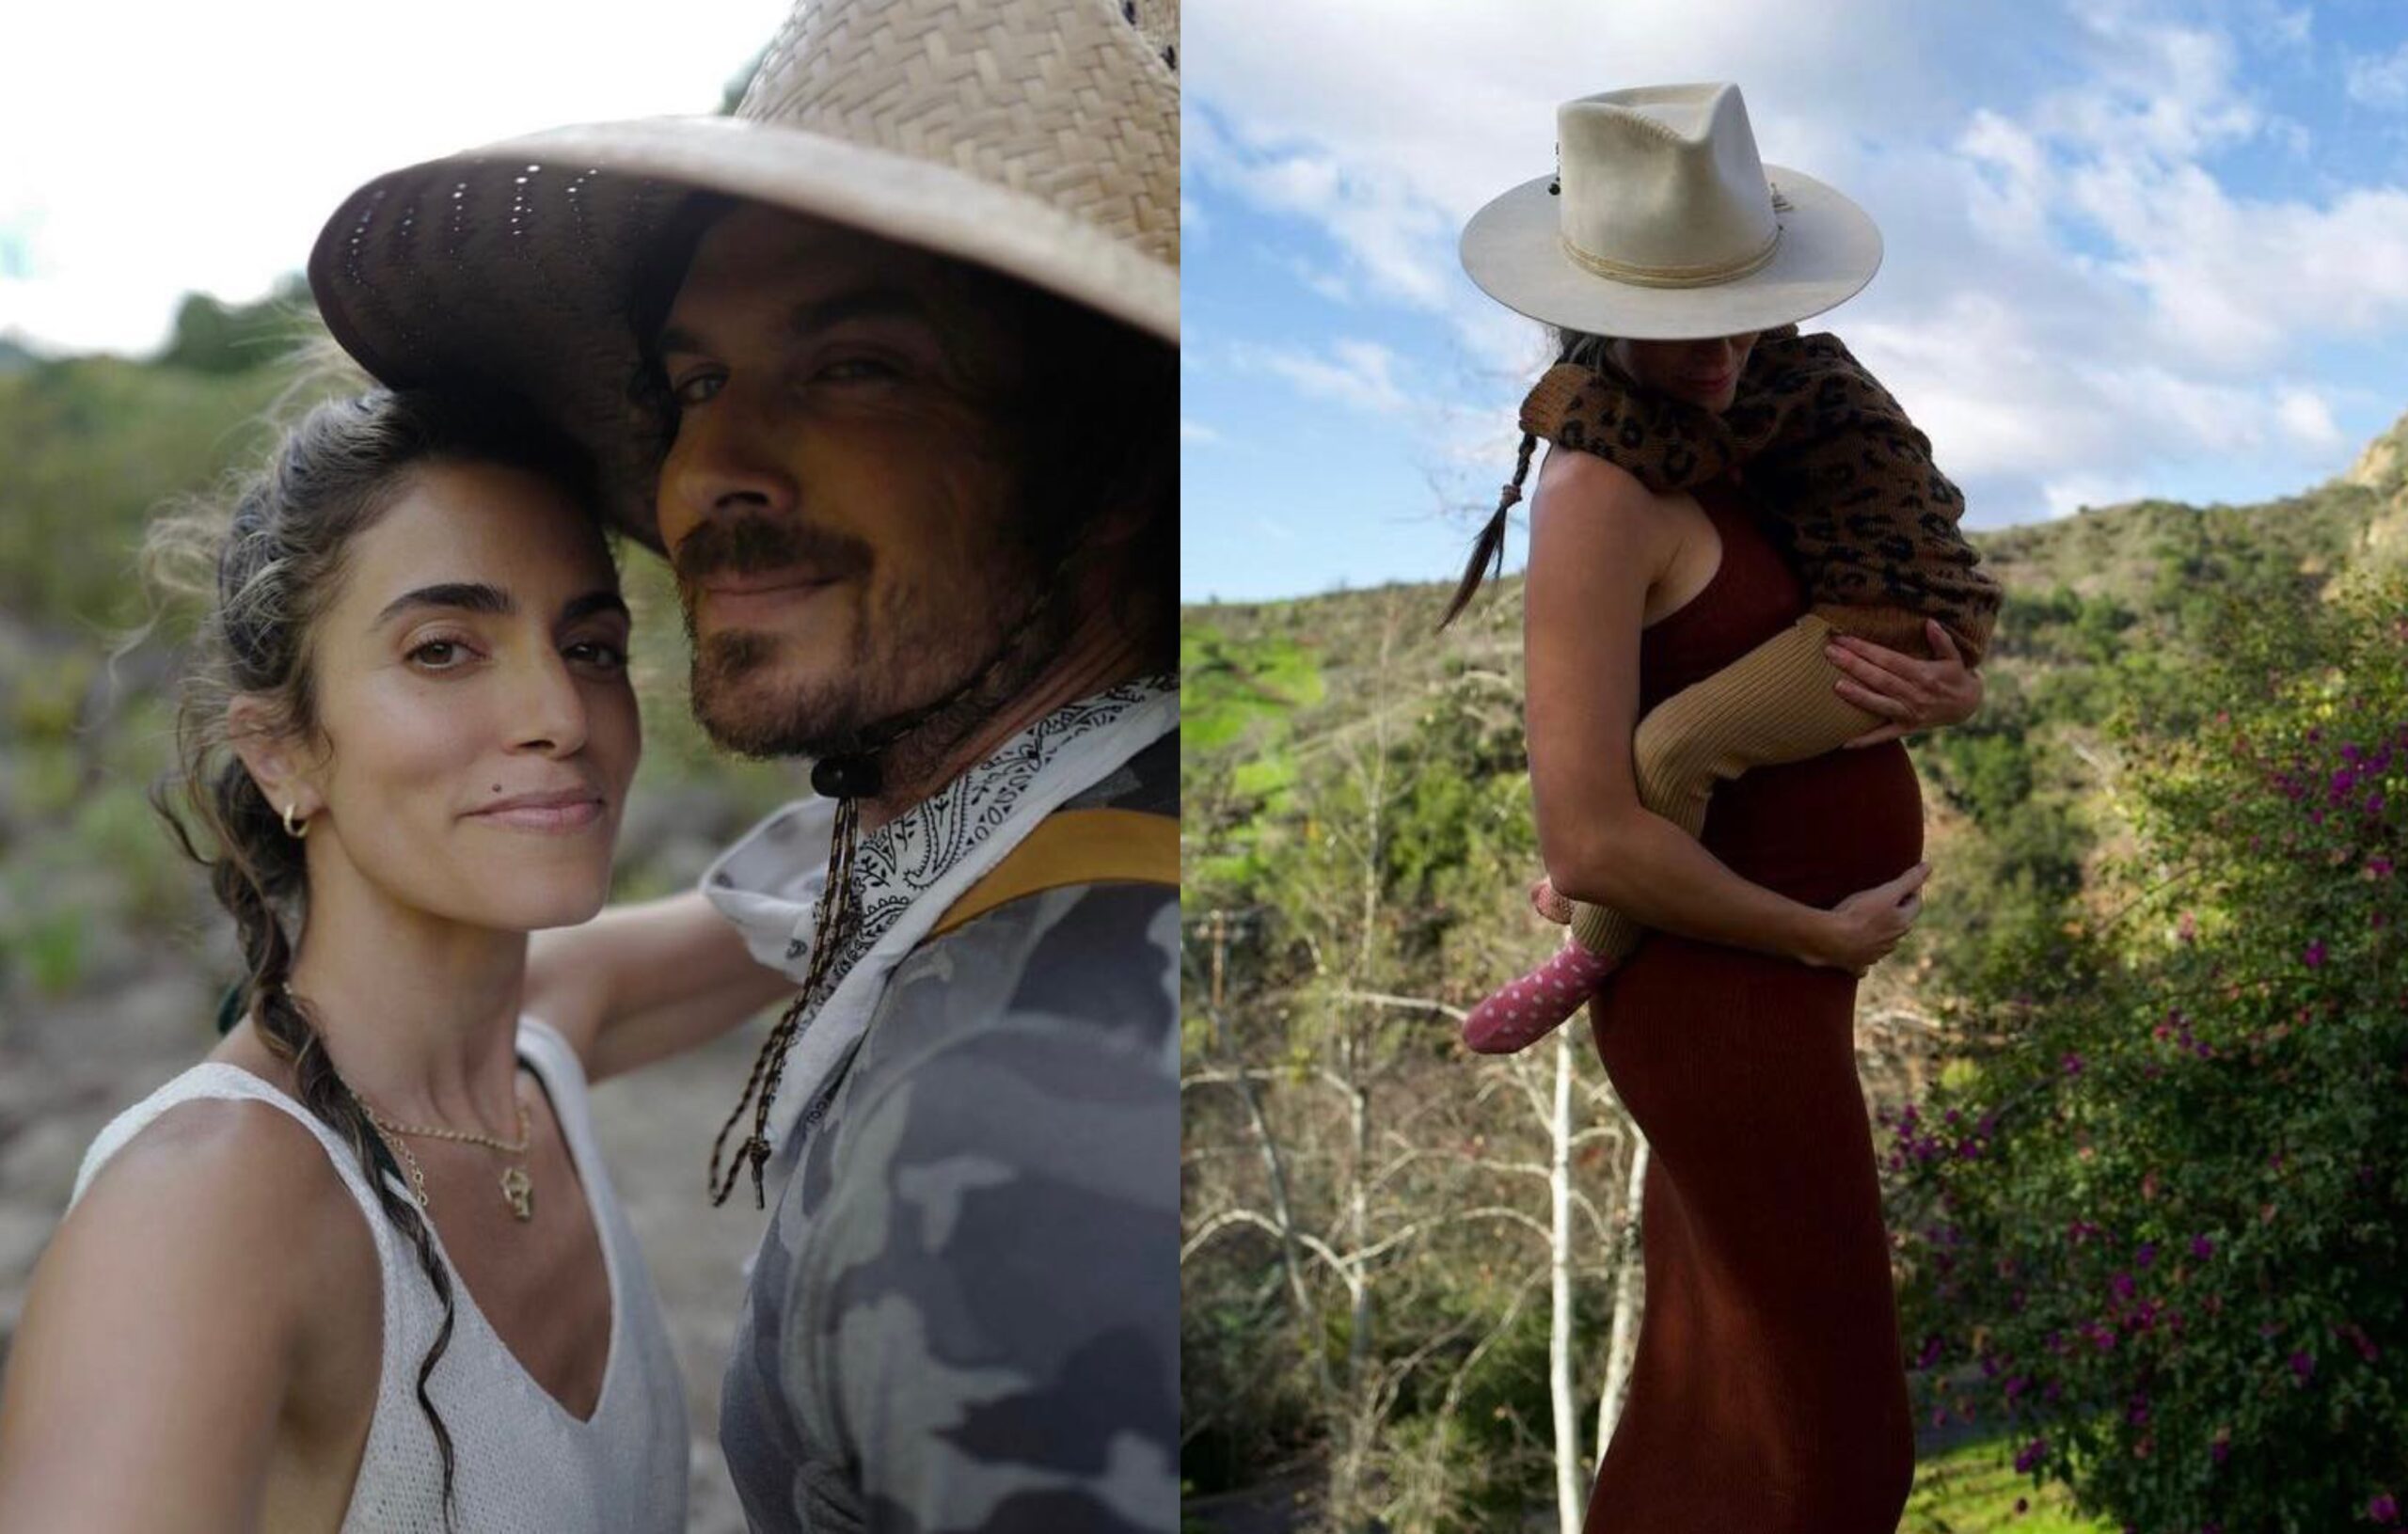 ‘What a gift’: Ian Somerhalder, Nikki Reed expecting baby no. 2